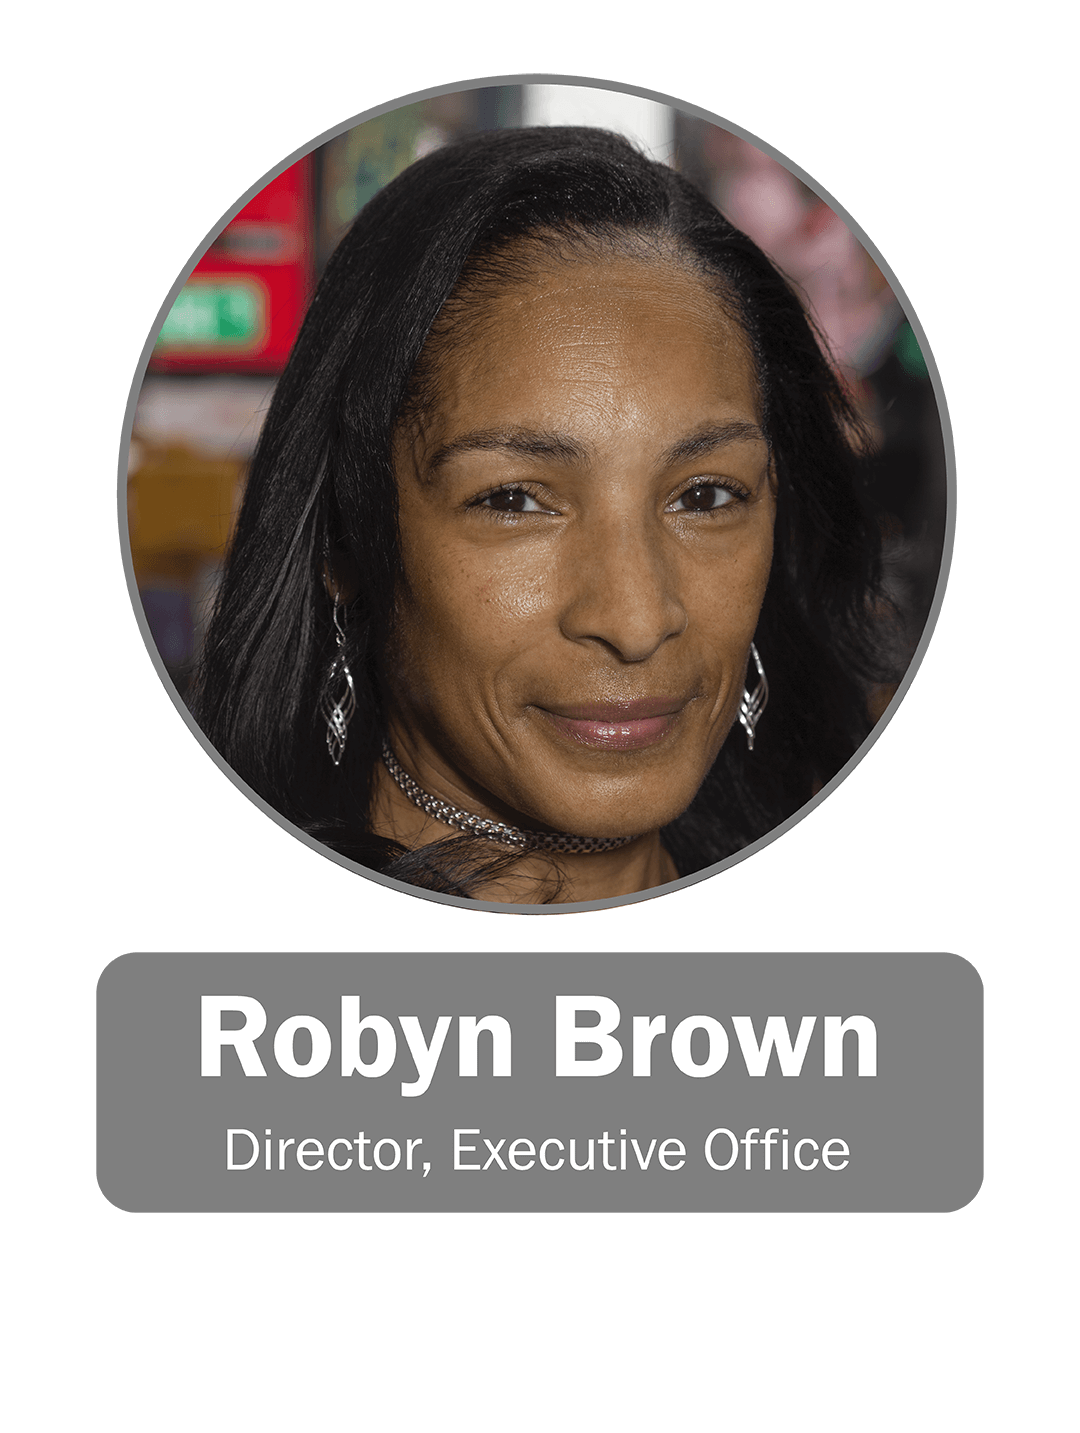 Robyn Brown | Director, Executive Office